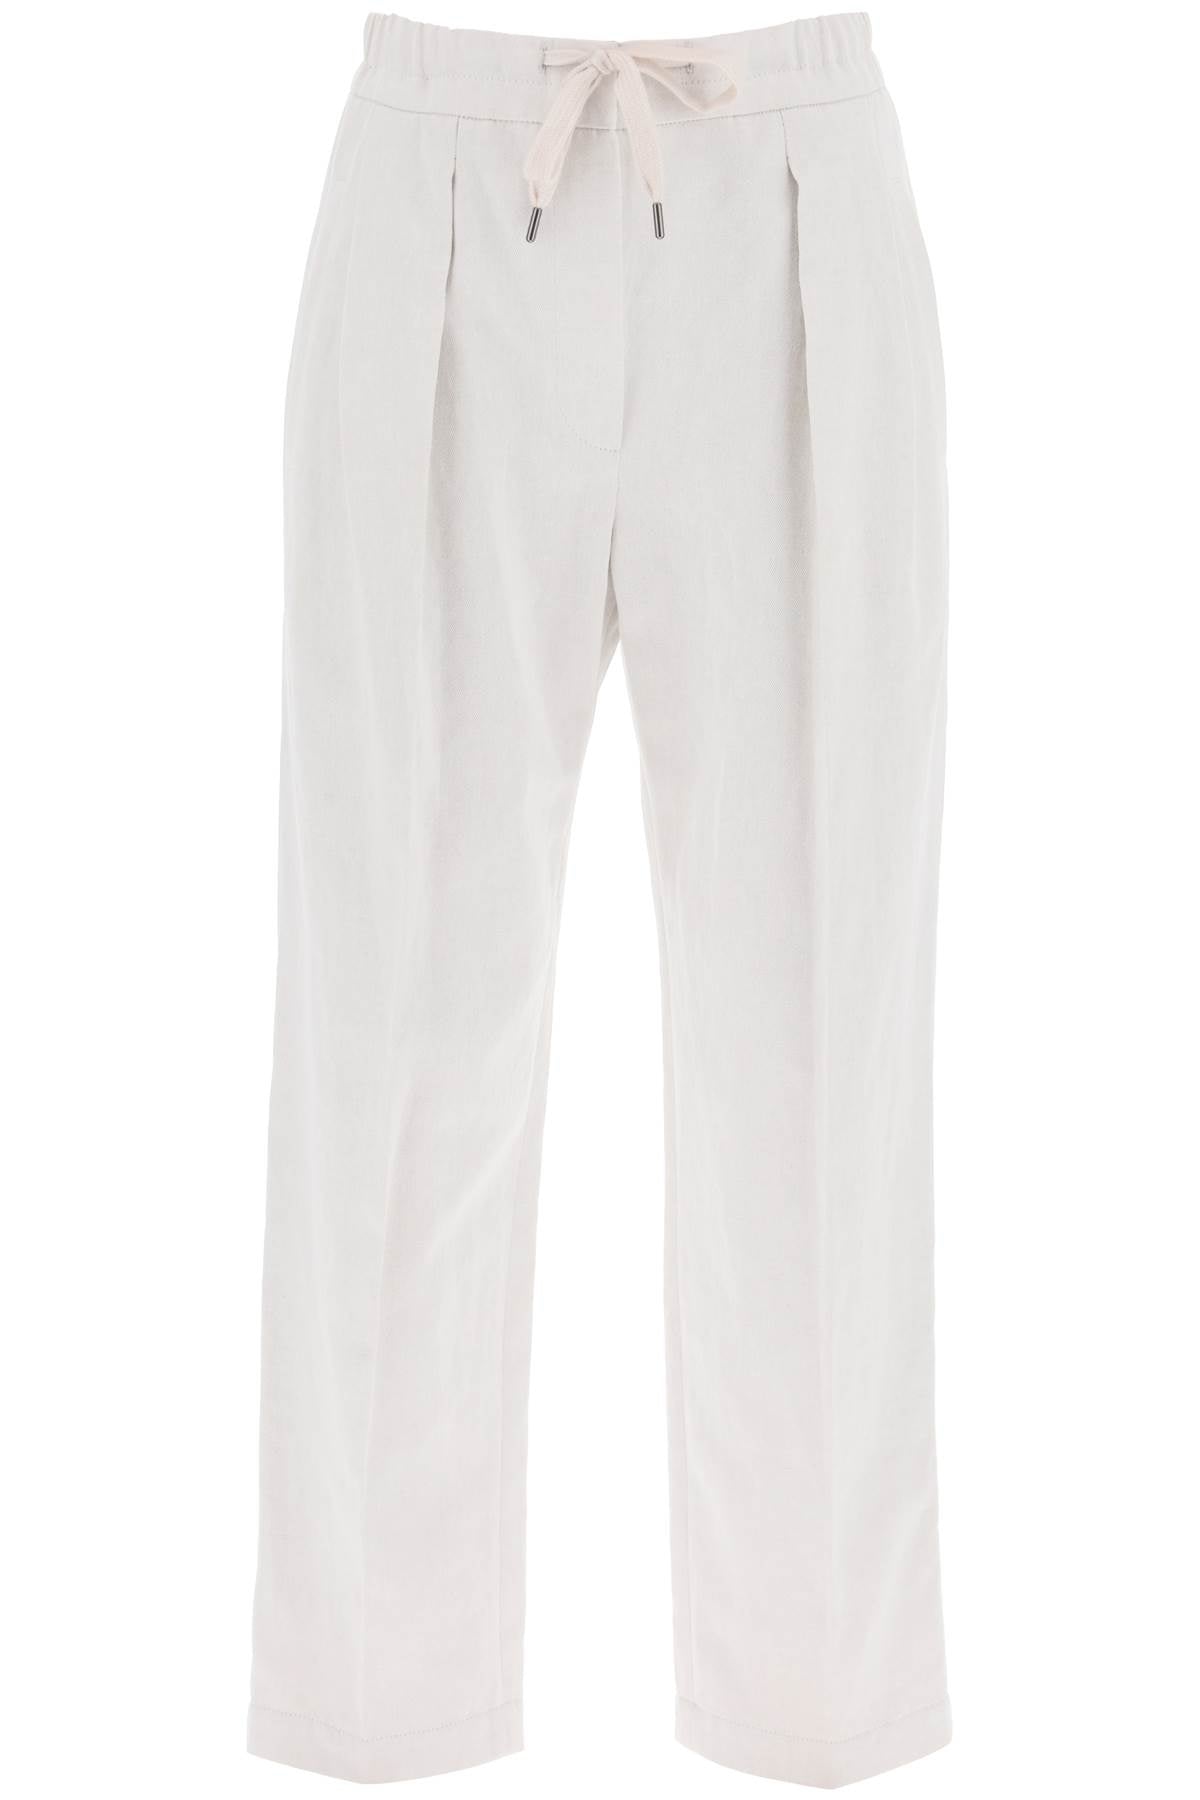 Brunello Cucinelli Cotton And Linen Slouchy Pants-women > clothing > trousers-Brunello Cucinelli-Urbanheer